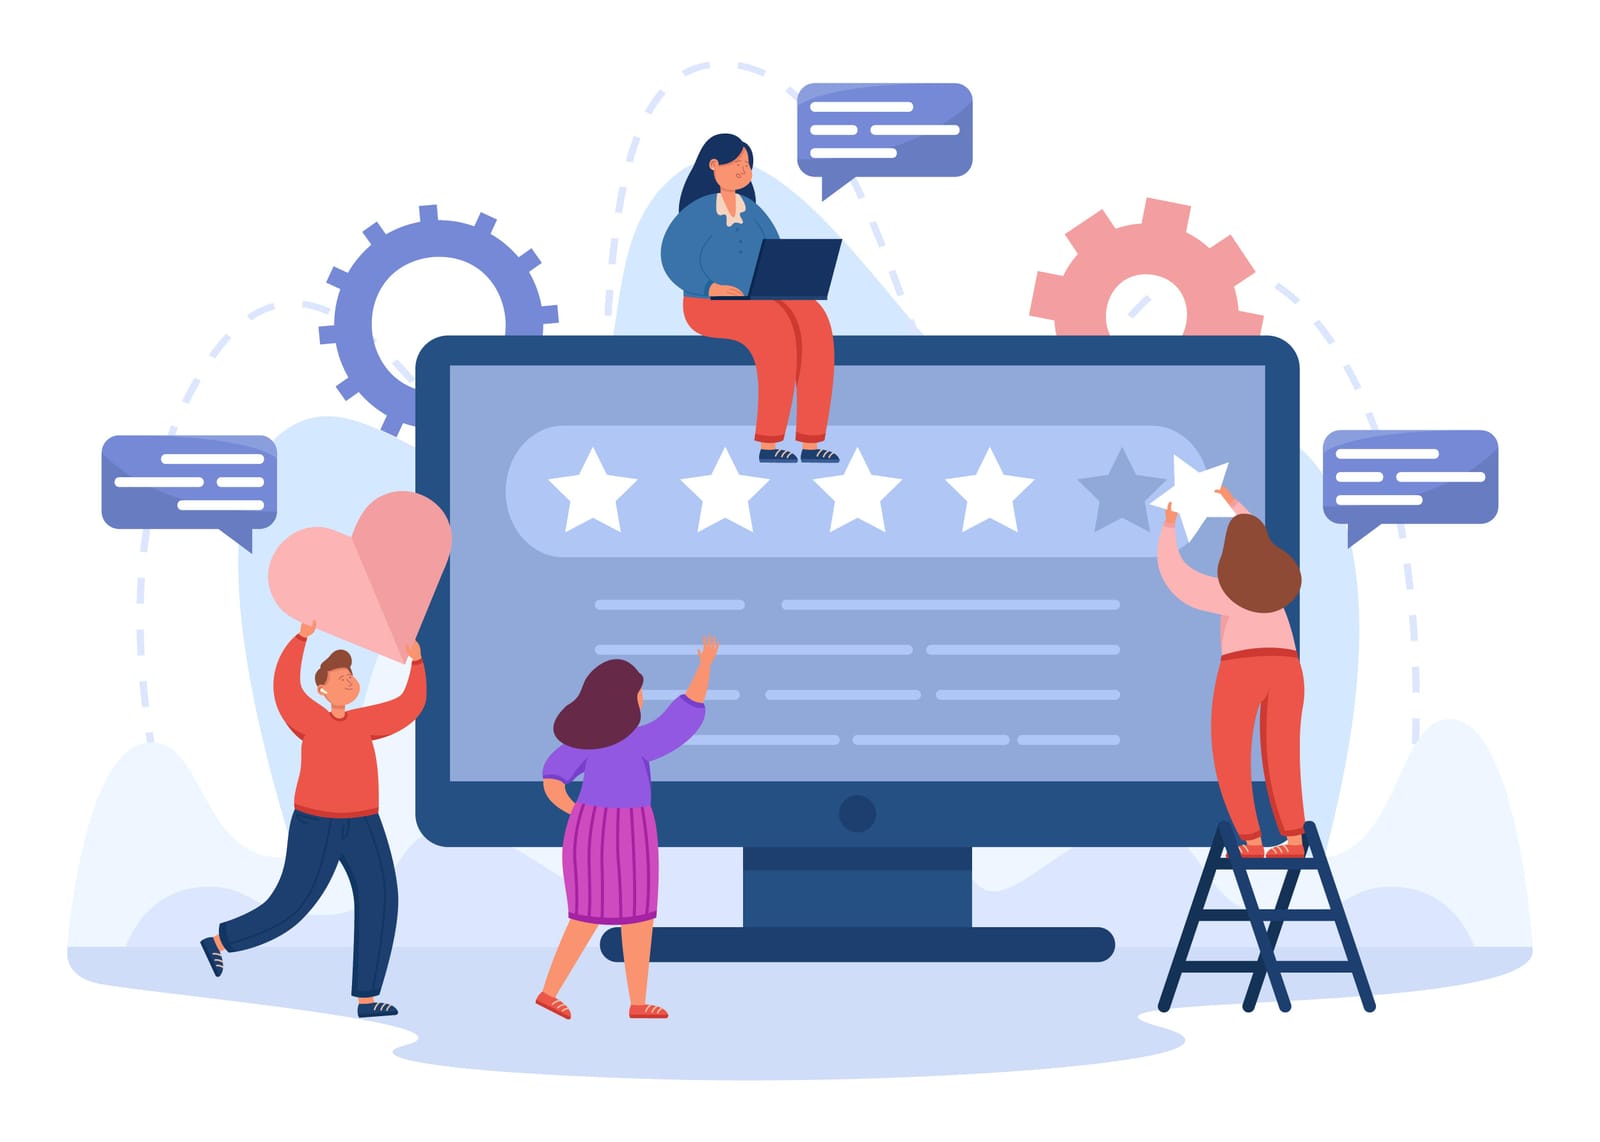 A review management platform is a tool that businesses use to monitor, analyze, and respond to customer reviews across multiple online platforms.